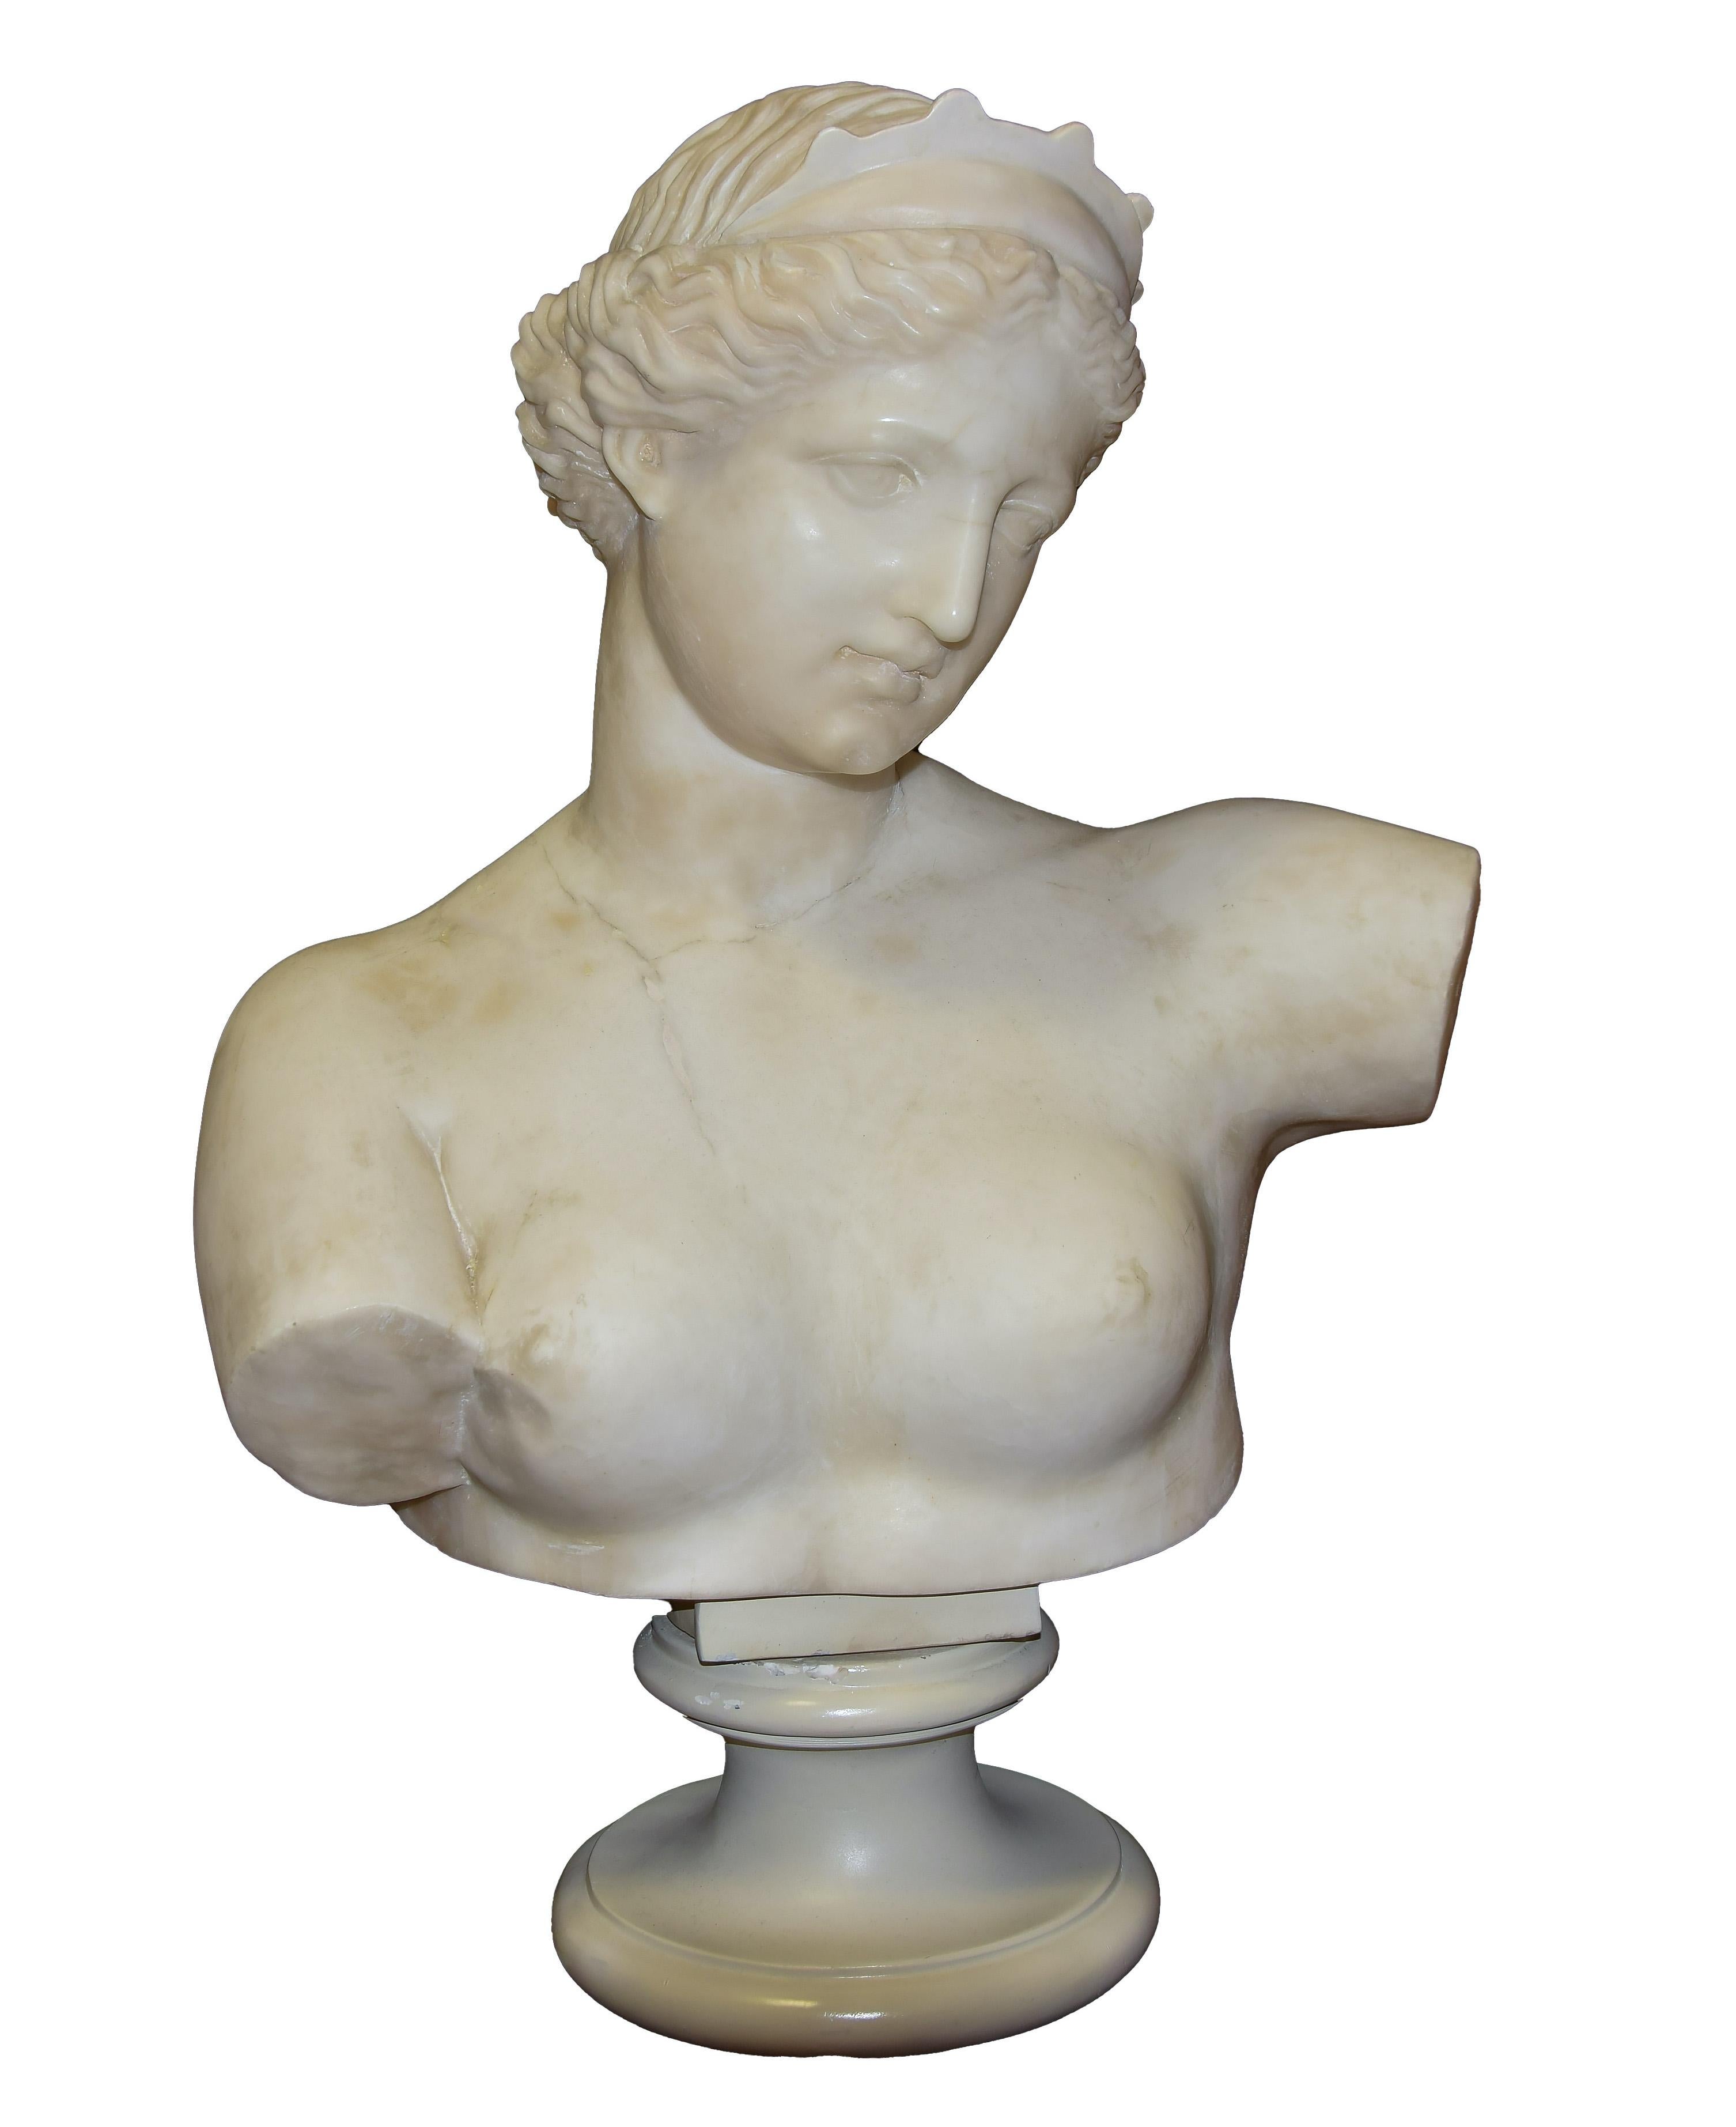 Unknown Figurative Sculpture - Ancient Marble Bust of Aphrodite - Italy - 19th Century